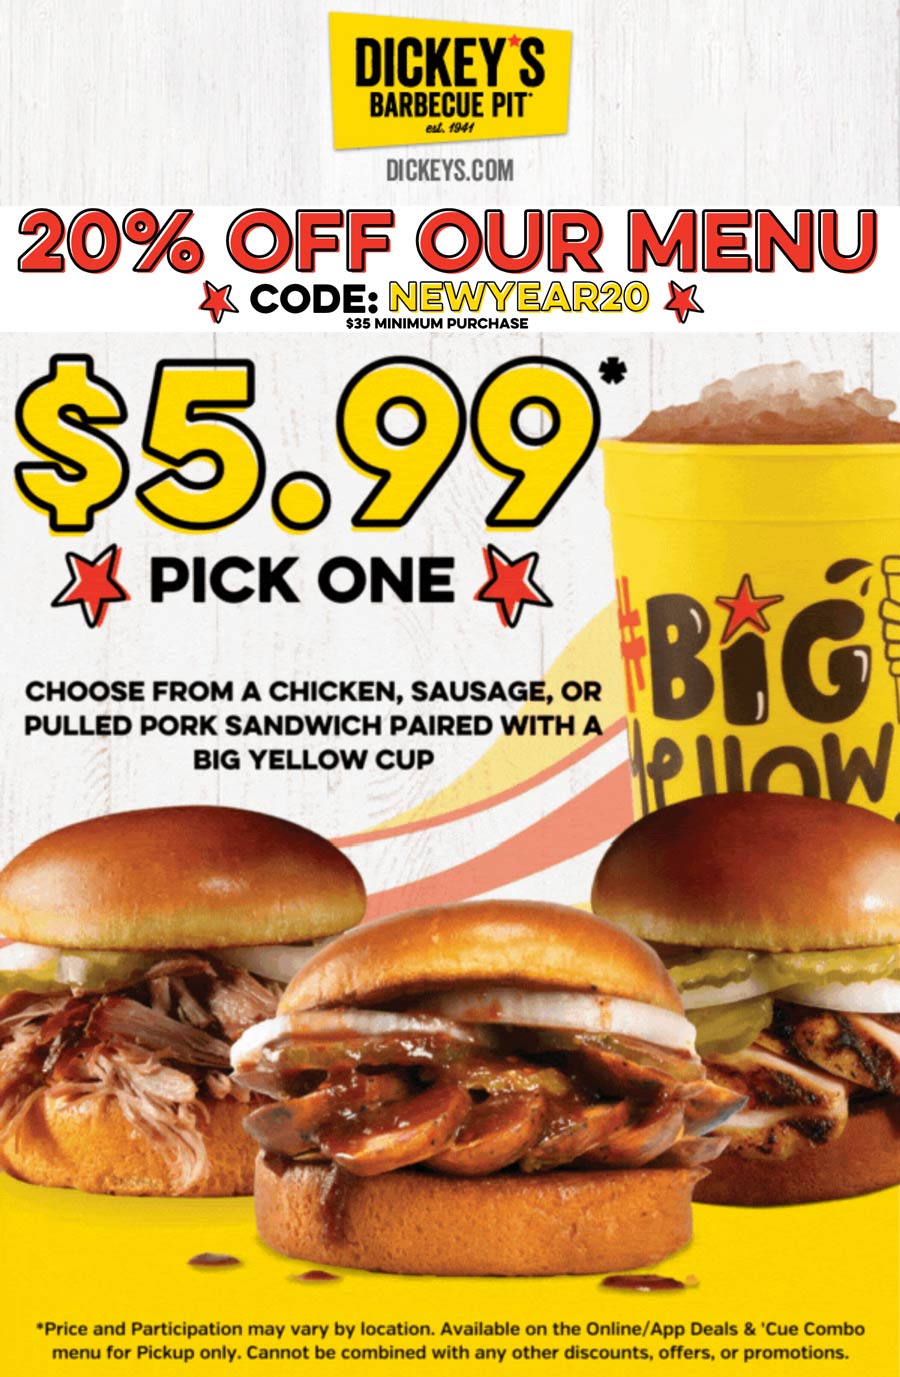 Dickeys Barbecue Pit restaurants Coupon  Chicken, sausage or pulled pork sandwich + drink = $6 at Dickeys Barbecue Pit #dickeysbarbecuepit 